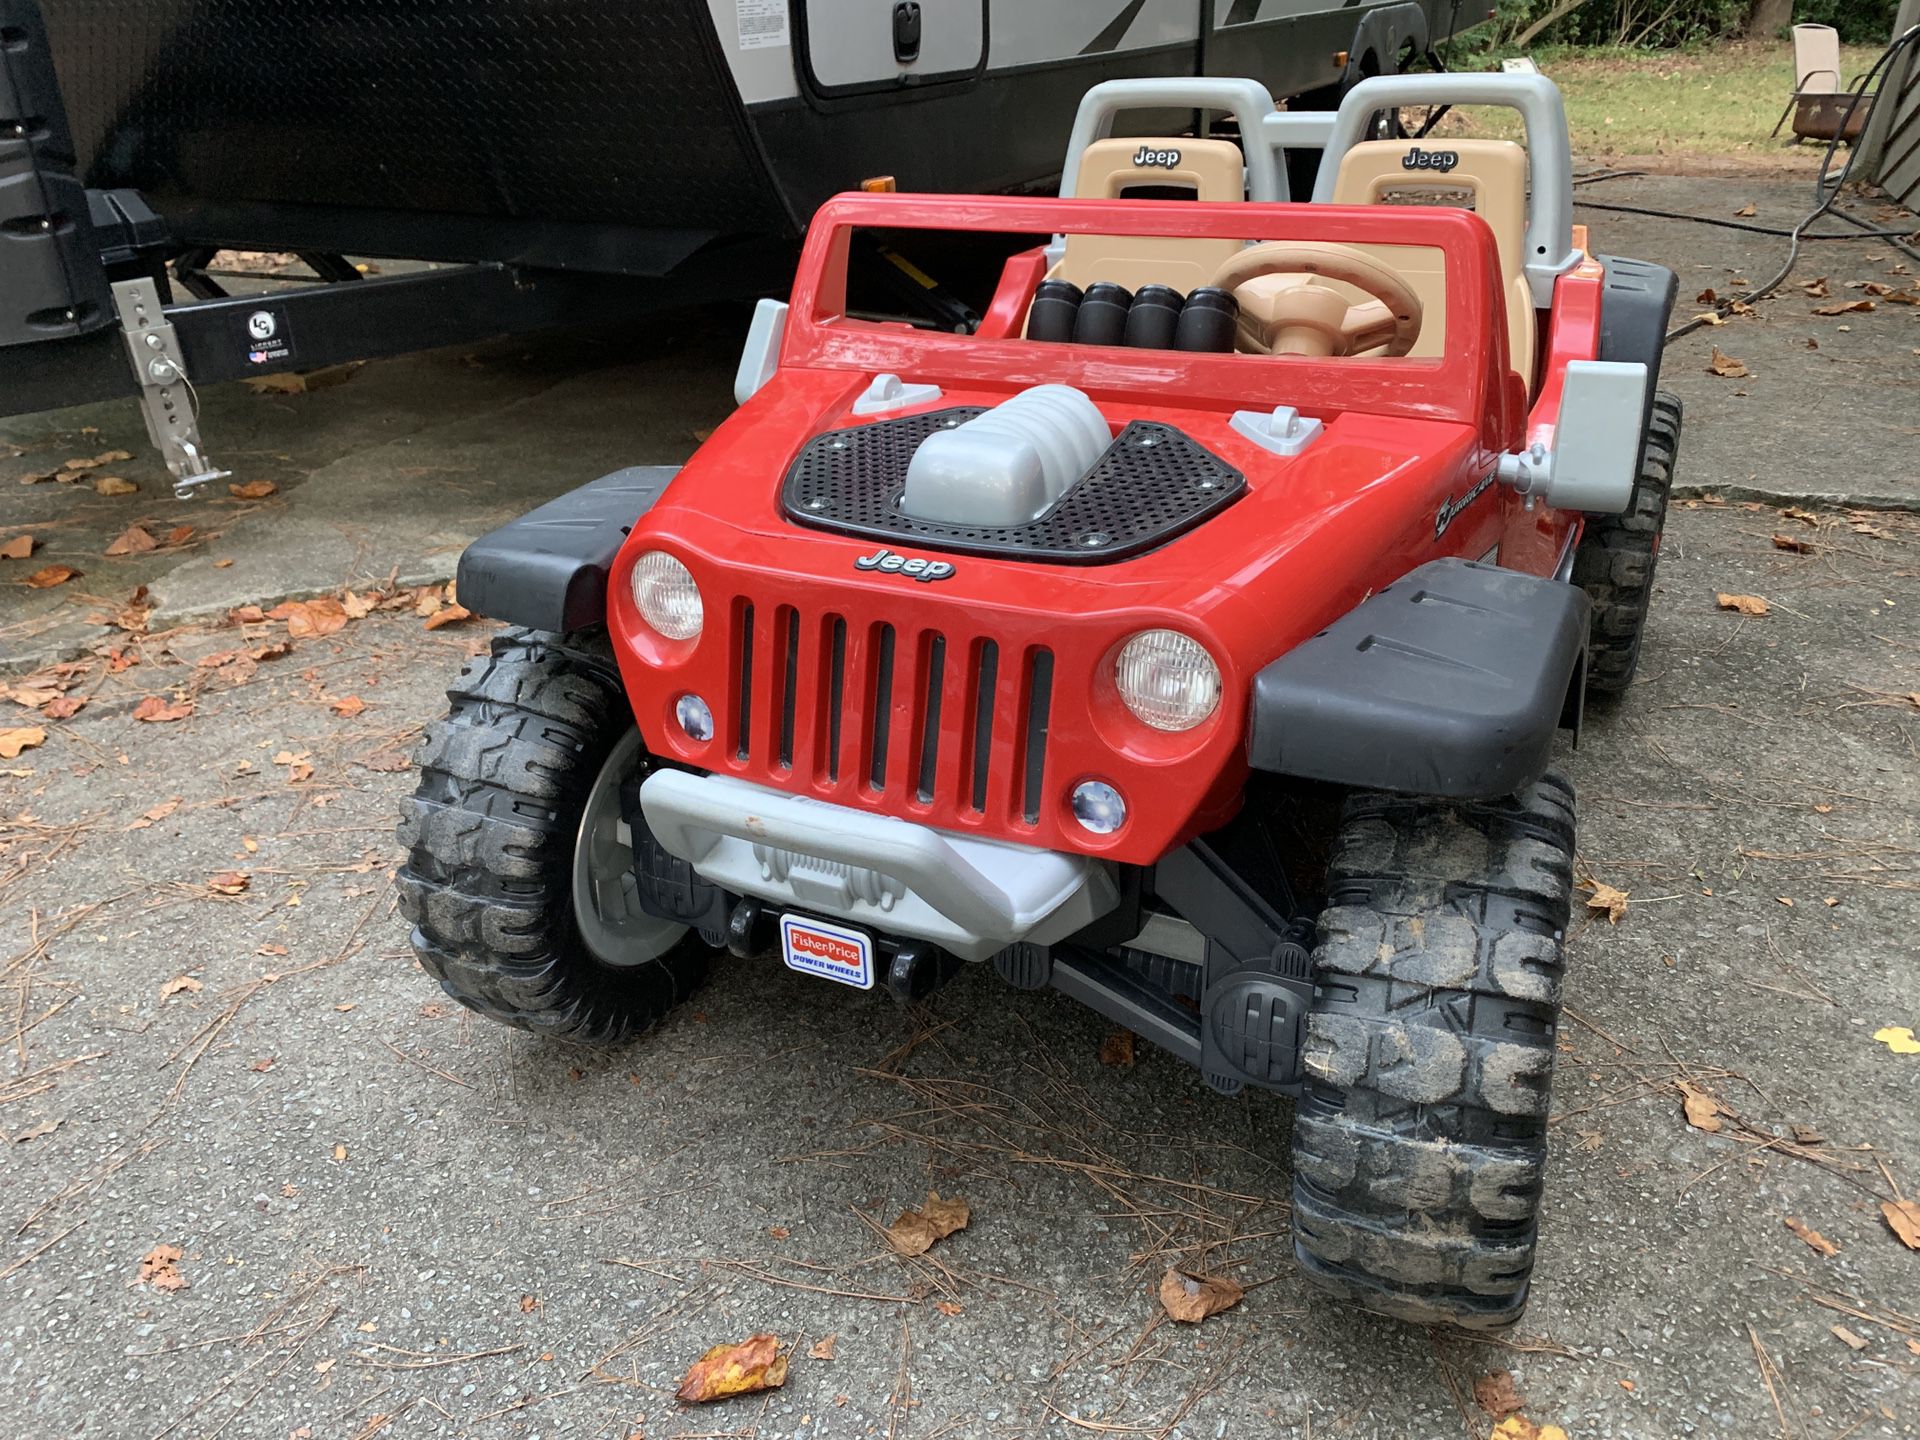 Jeep Power Wheels Toy in great condition.